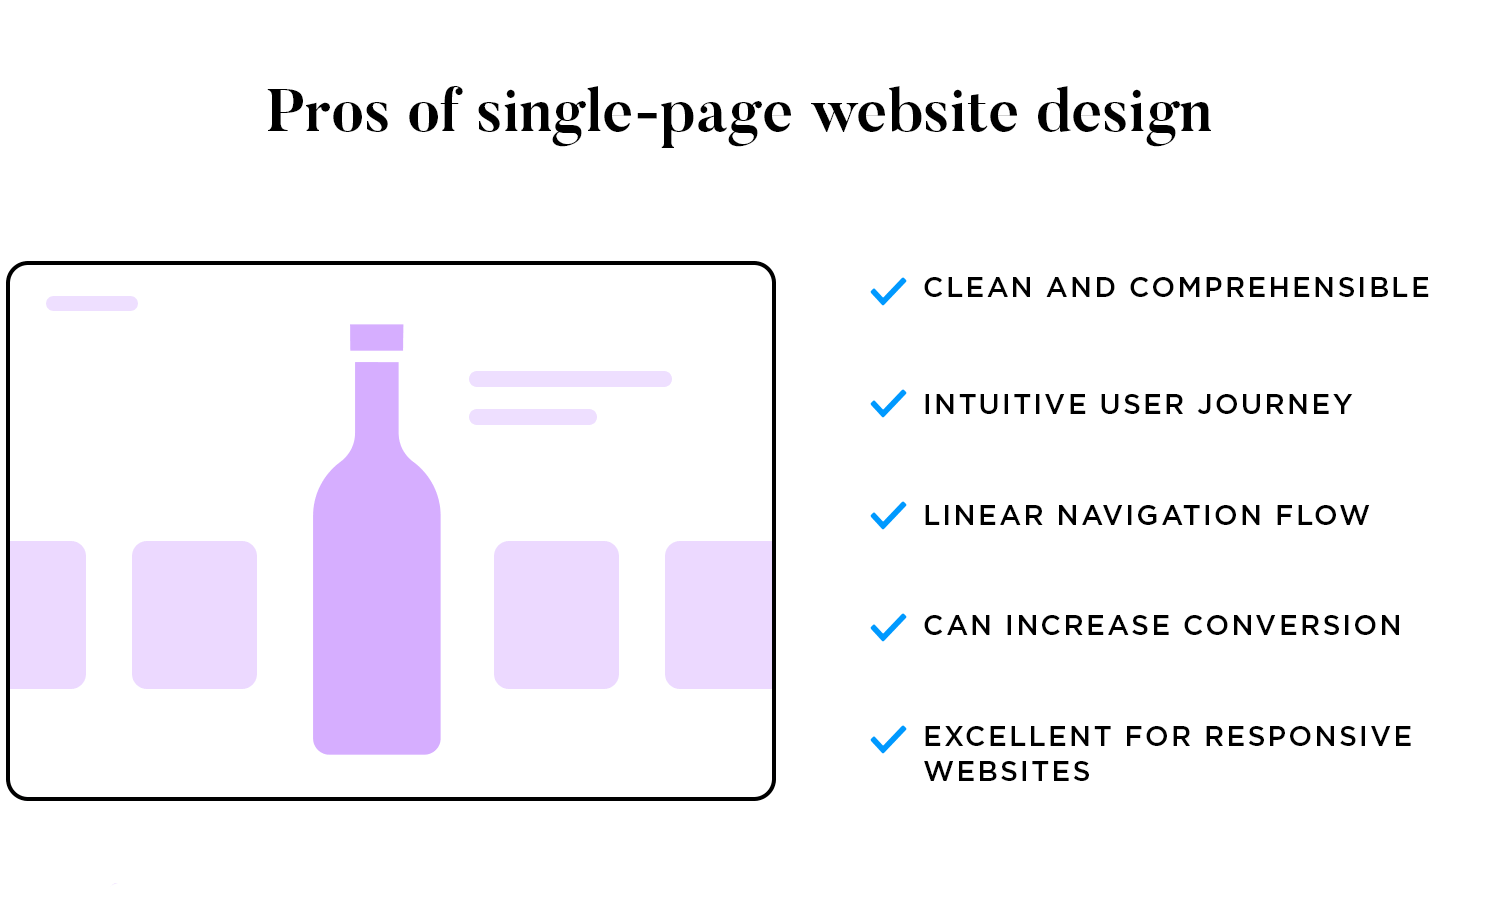 Pros of single-page website design infographic showing clean layout, intuitive navigation, and better mobile experience.